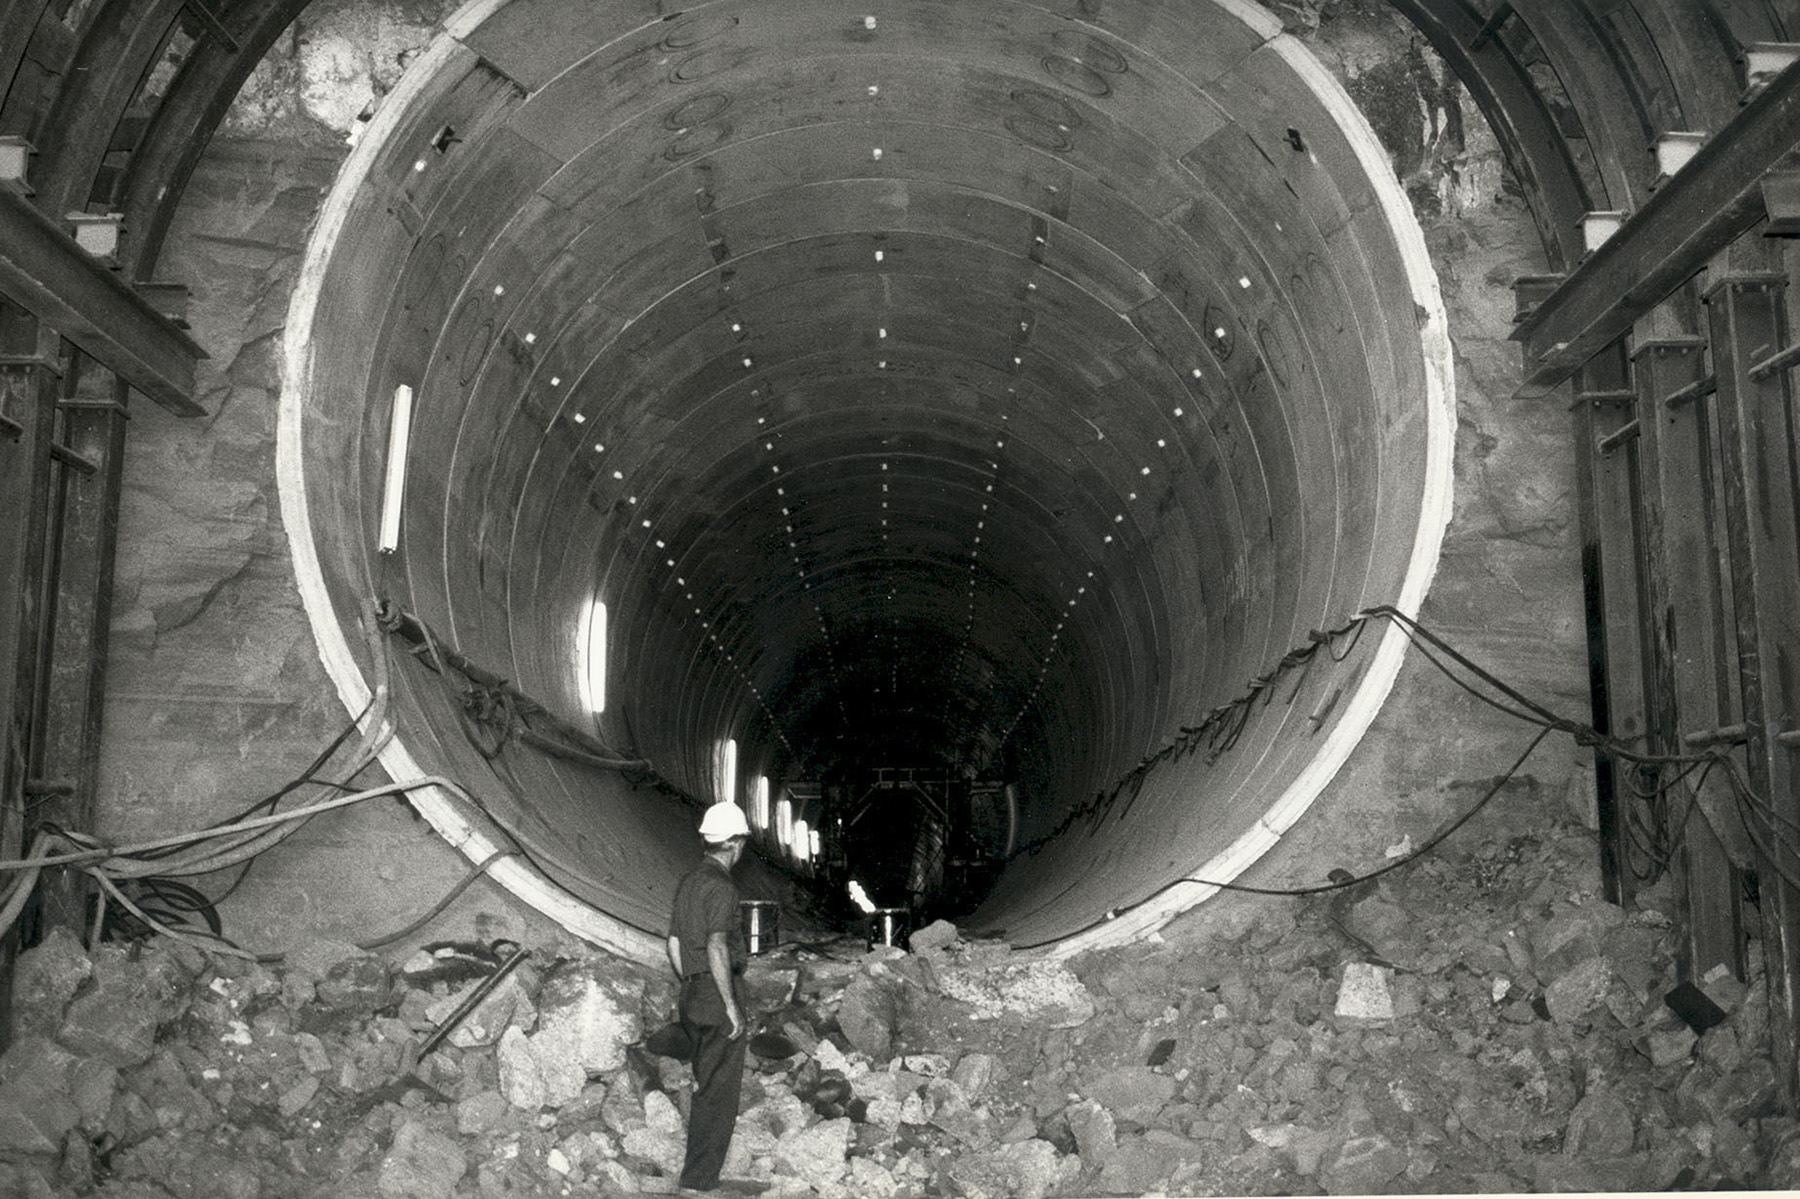 close up picture of an underground water canal under construction. there is a man standing at the edge of the built canal staring into it.